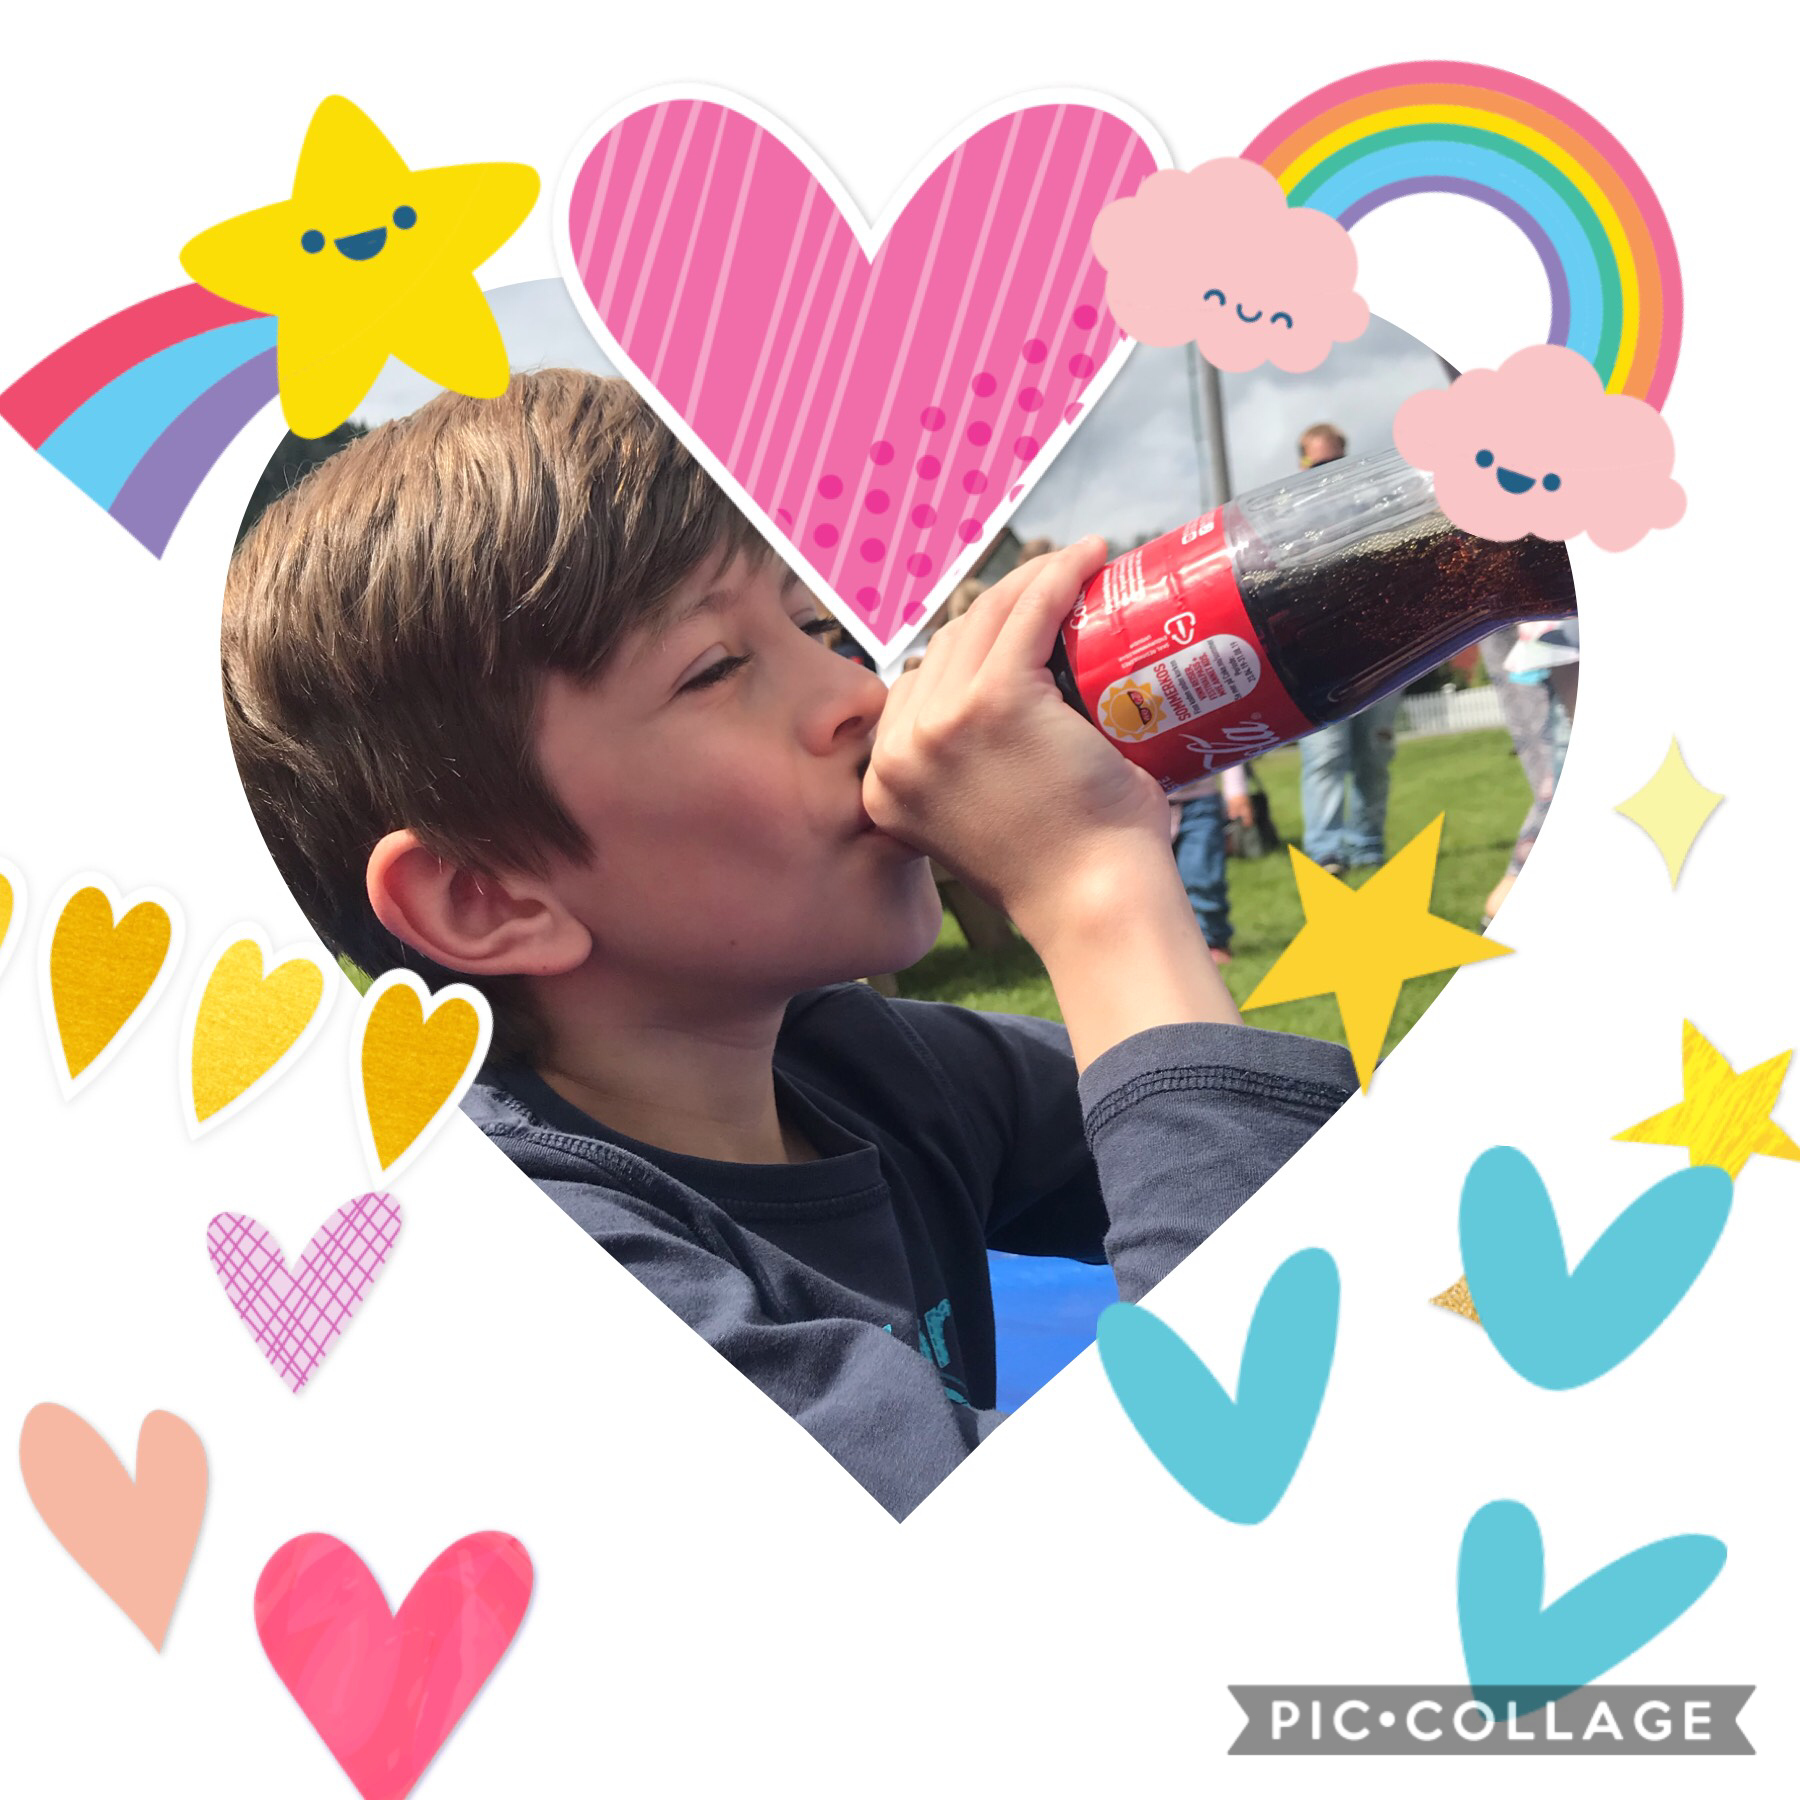 I love the cola,not the boy